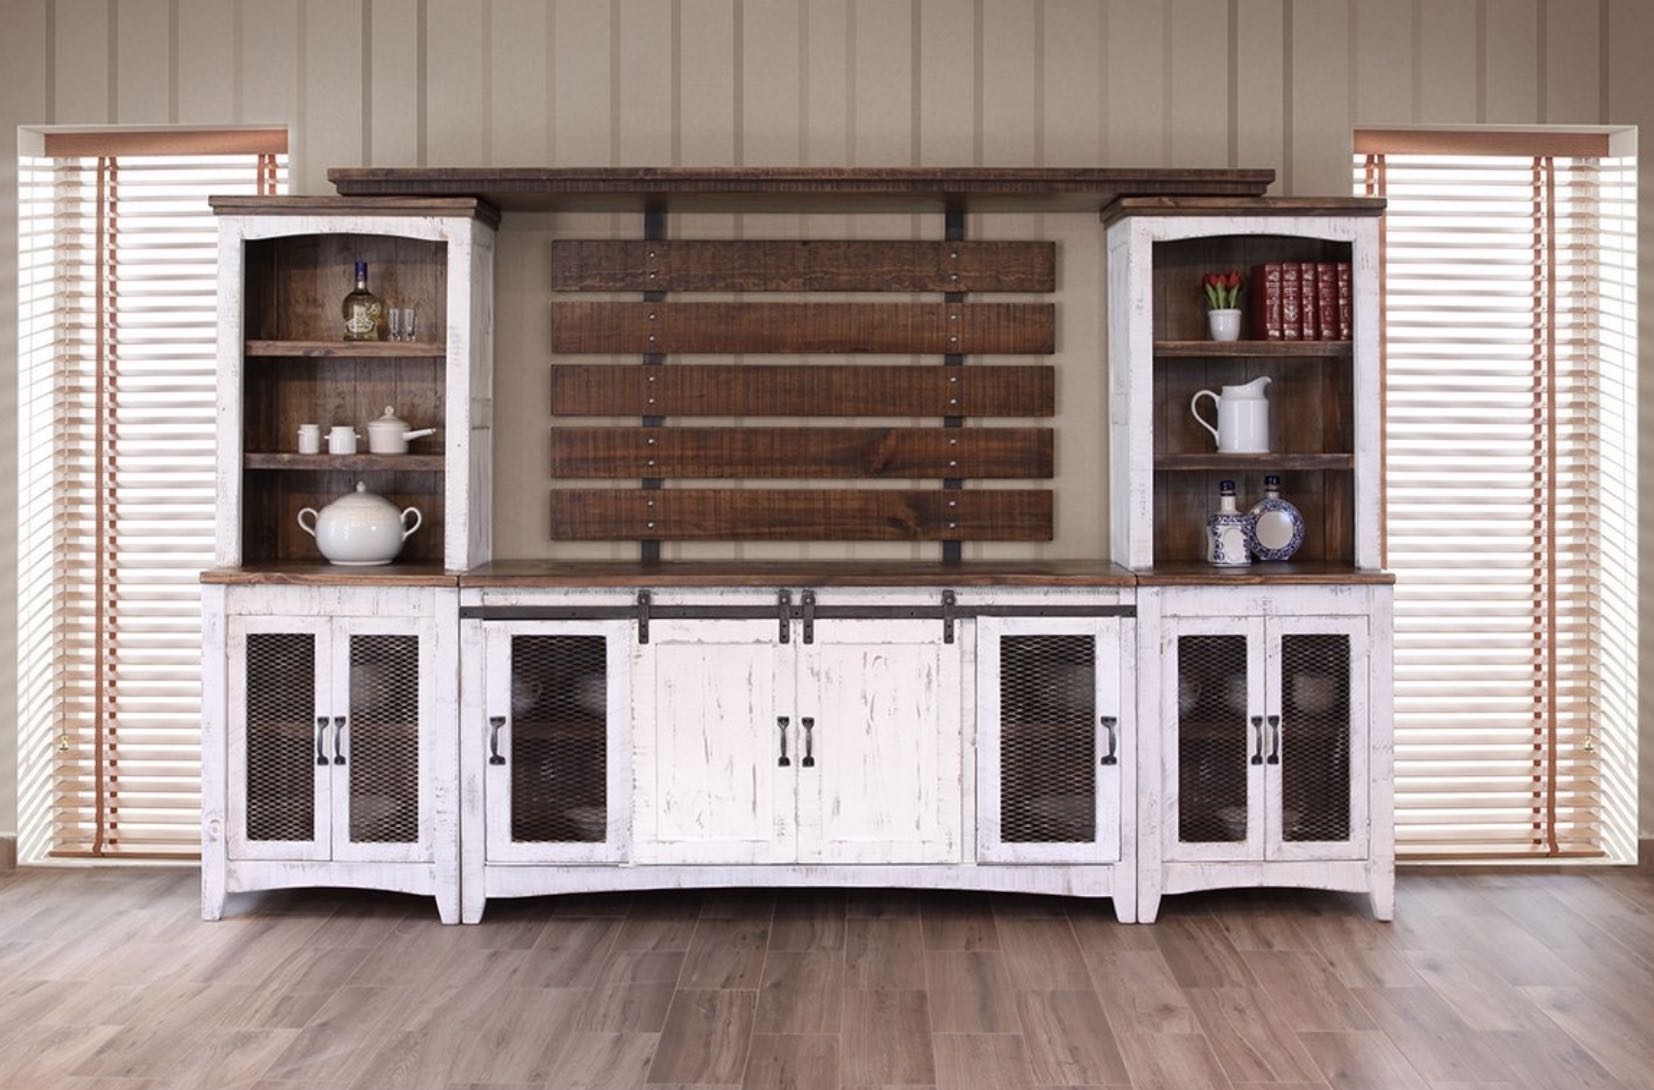 Wood Media Centers: Stylish and Functional Furniture for Your Home